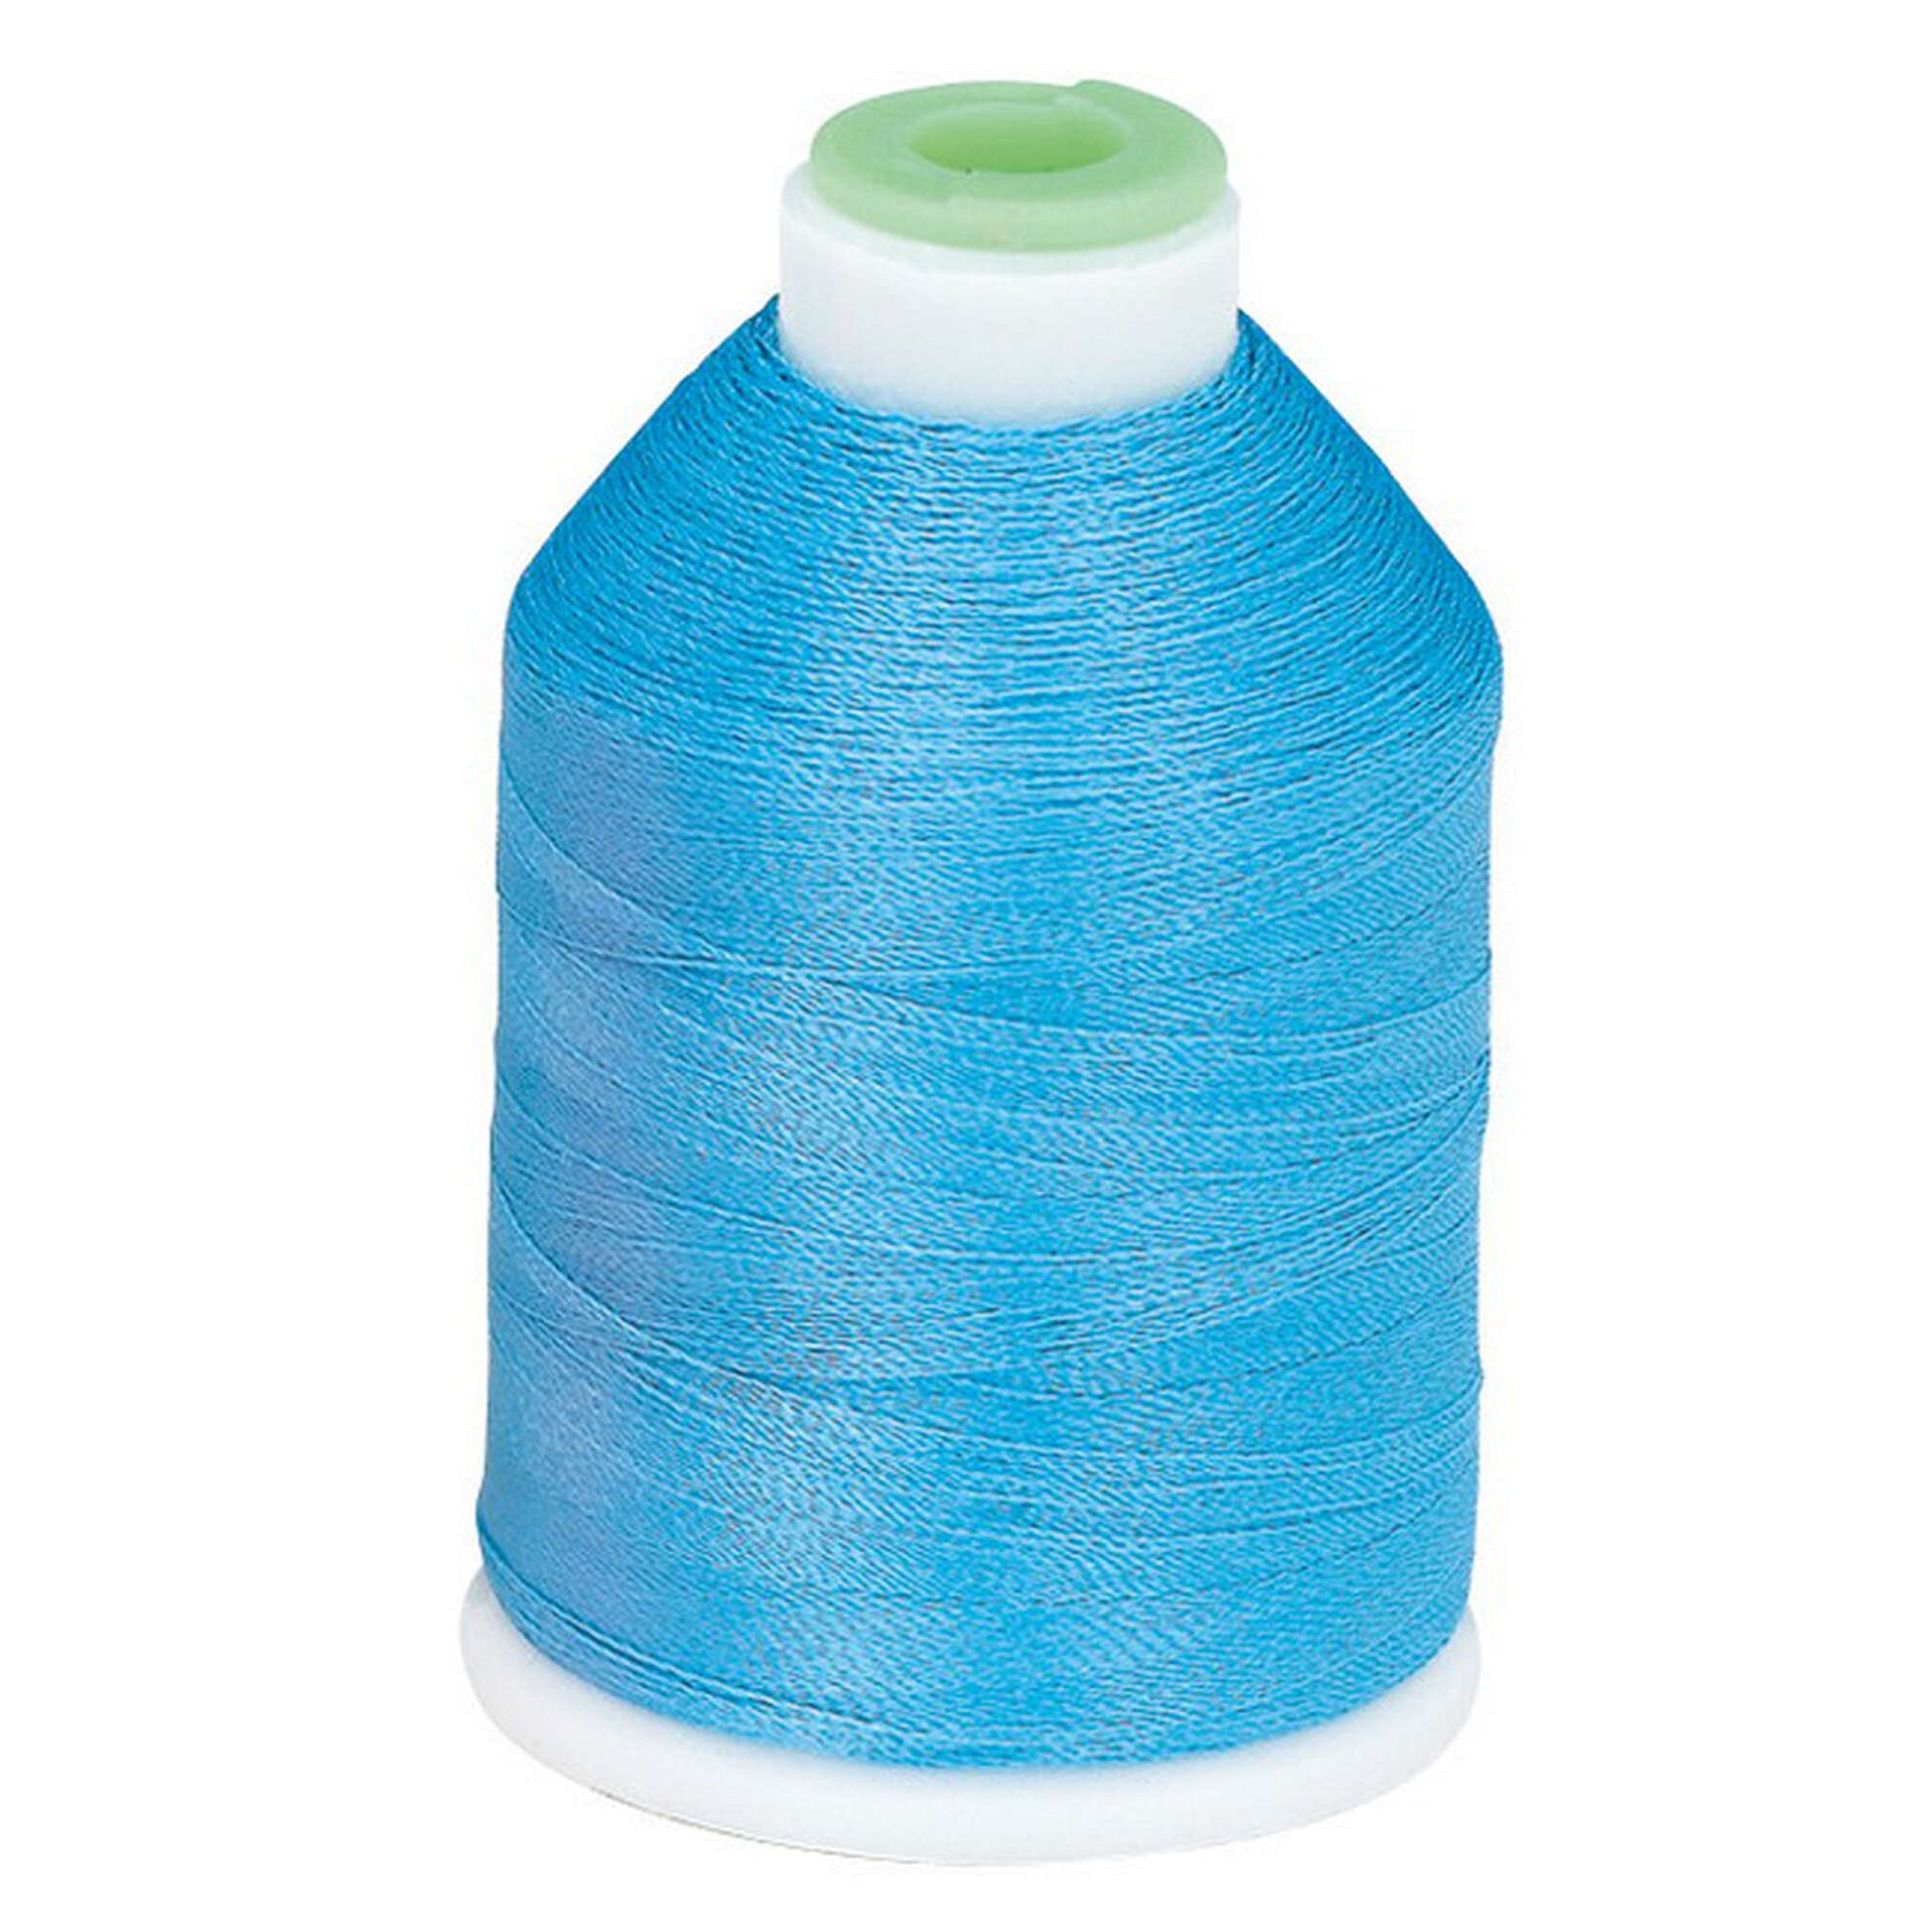 Coats & Clark Machine Embroidery Thread (1100 Yards) Miracle Blue